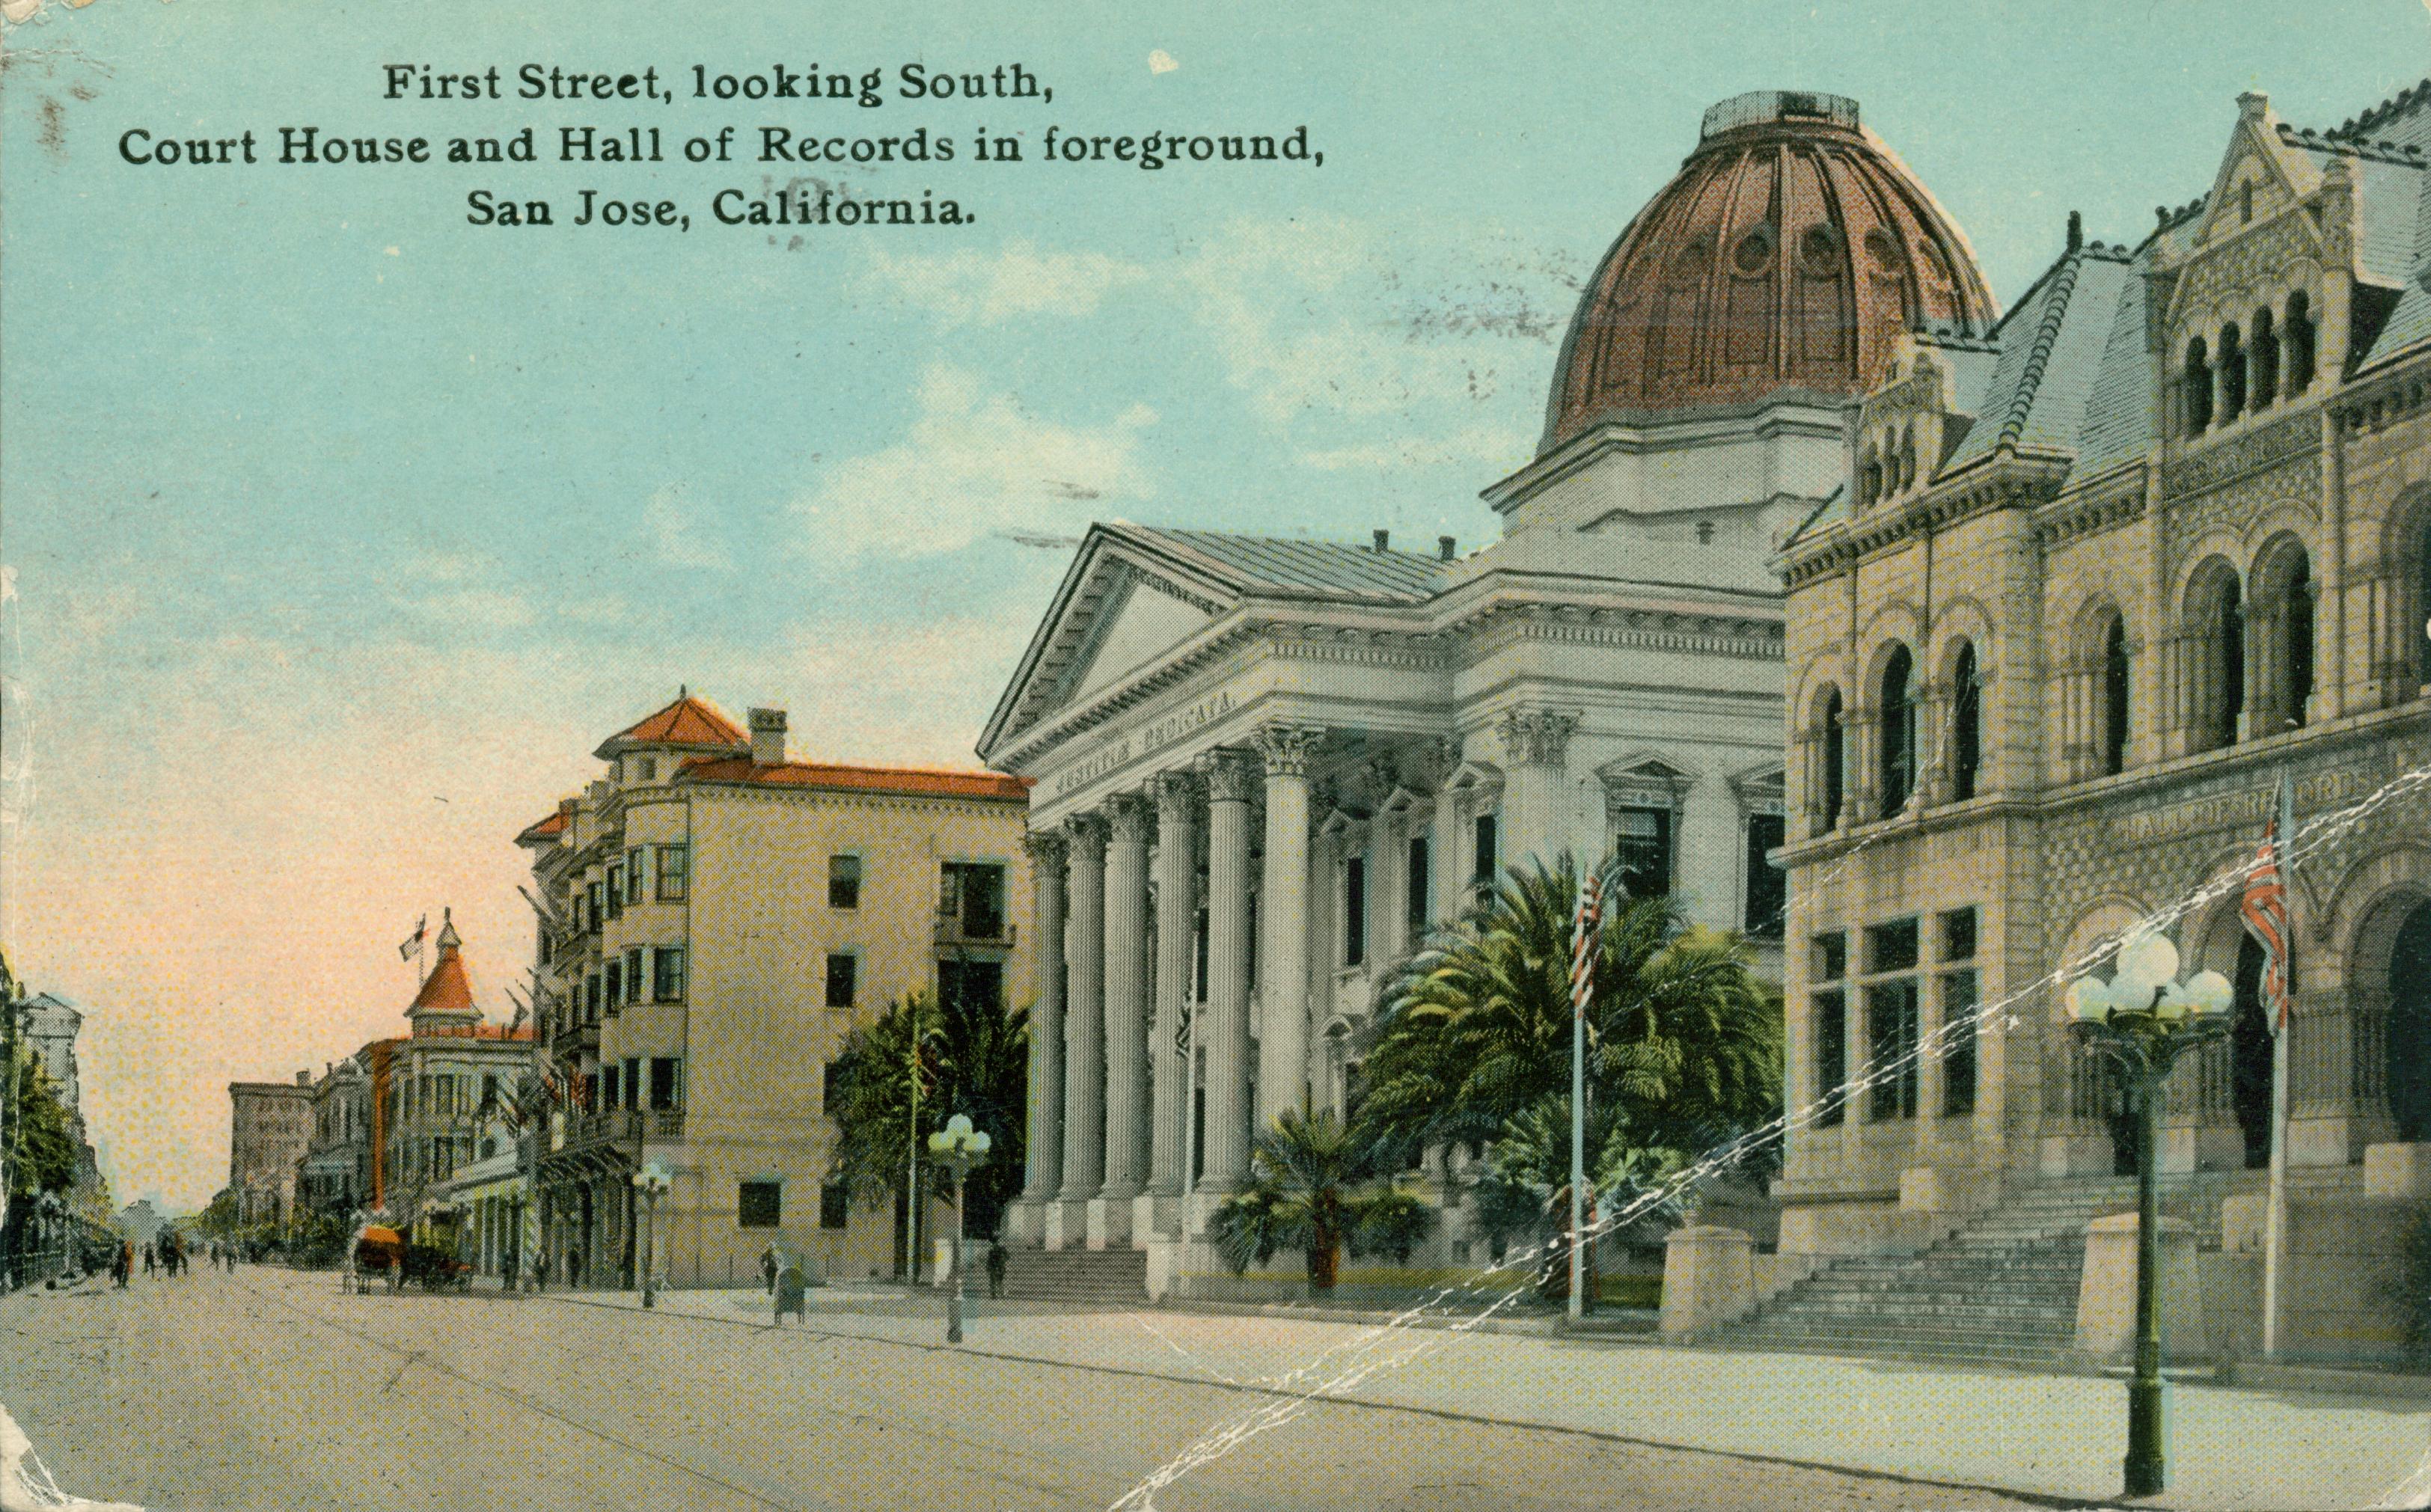 Exterior view of the Court House, Hall of Records and First Street, San Jose California